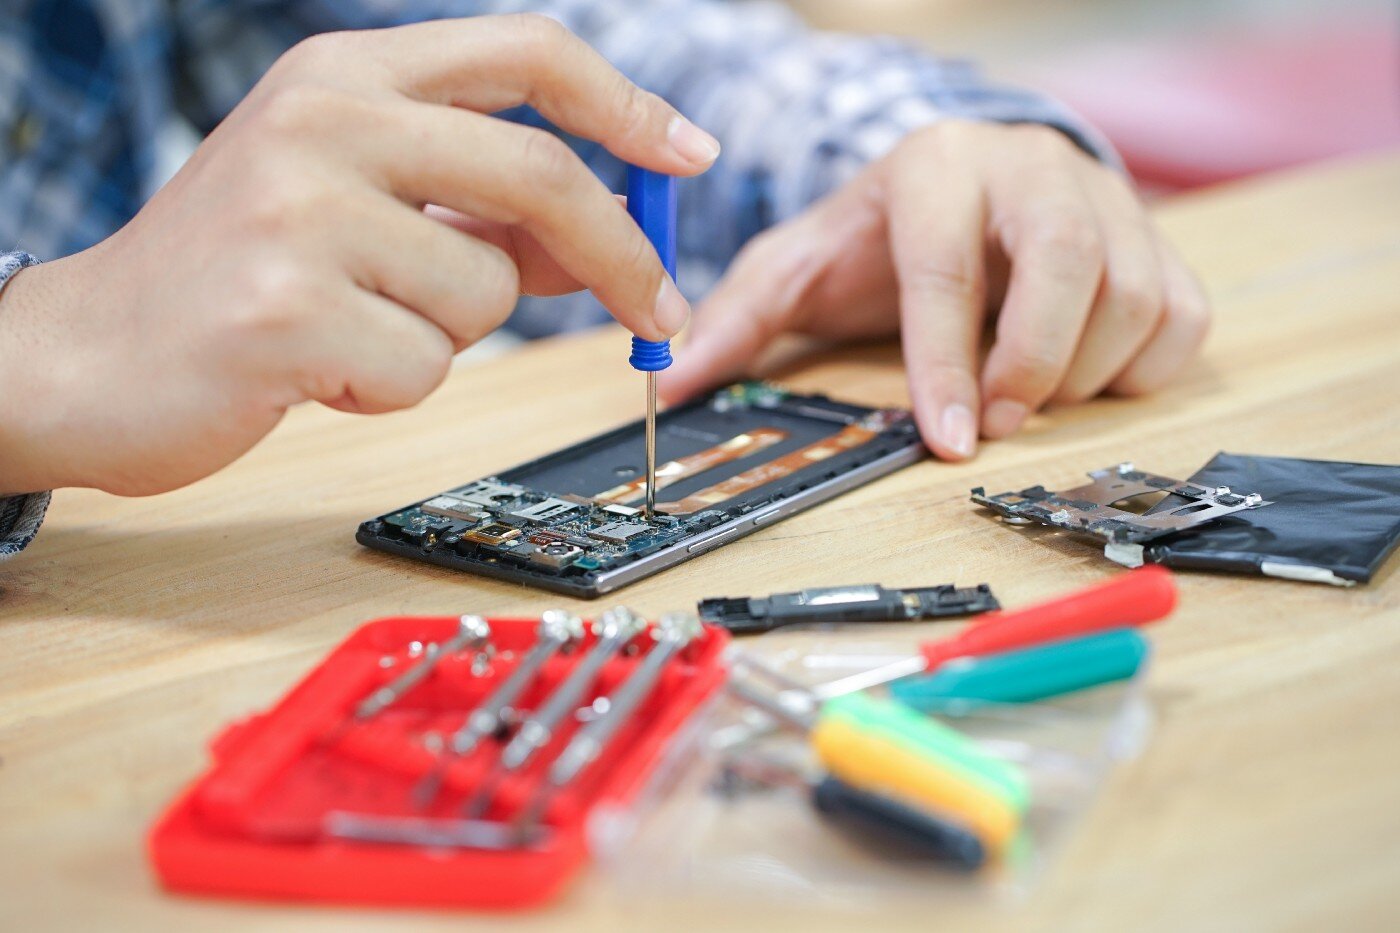 Used Tech and DIY Repair Are Booming Amidst Pandemic